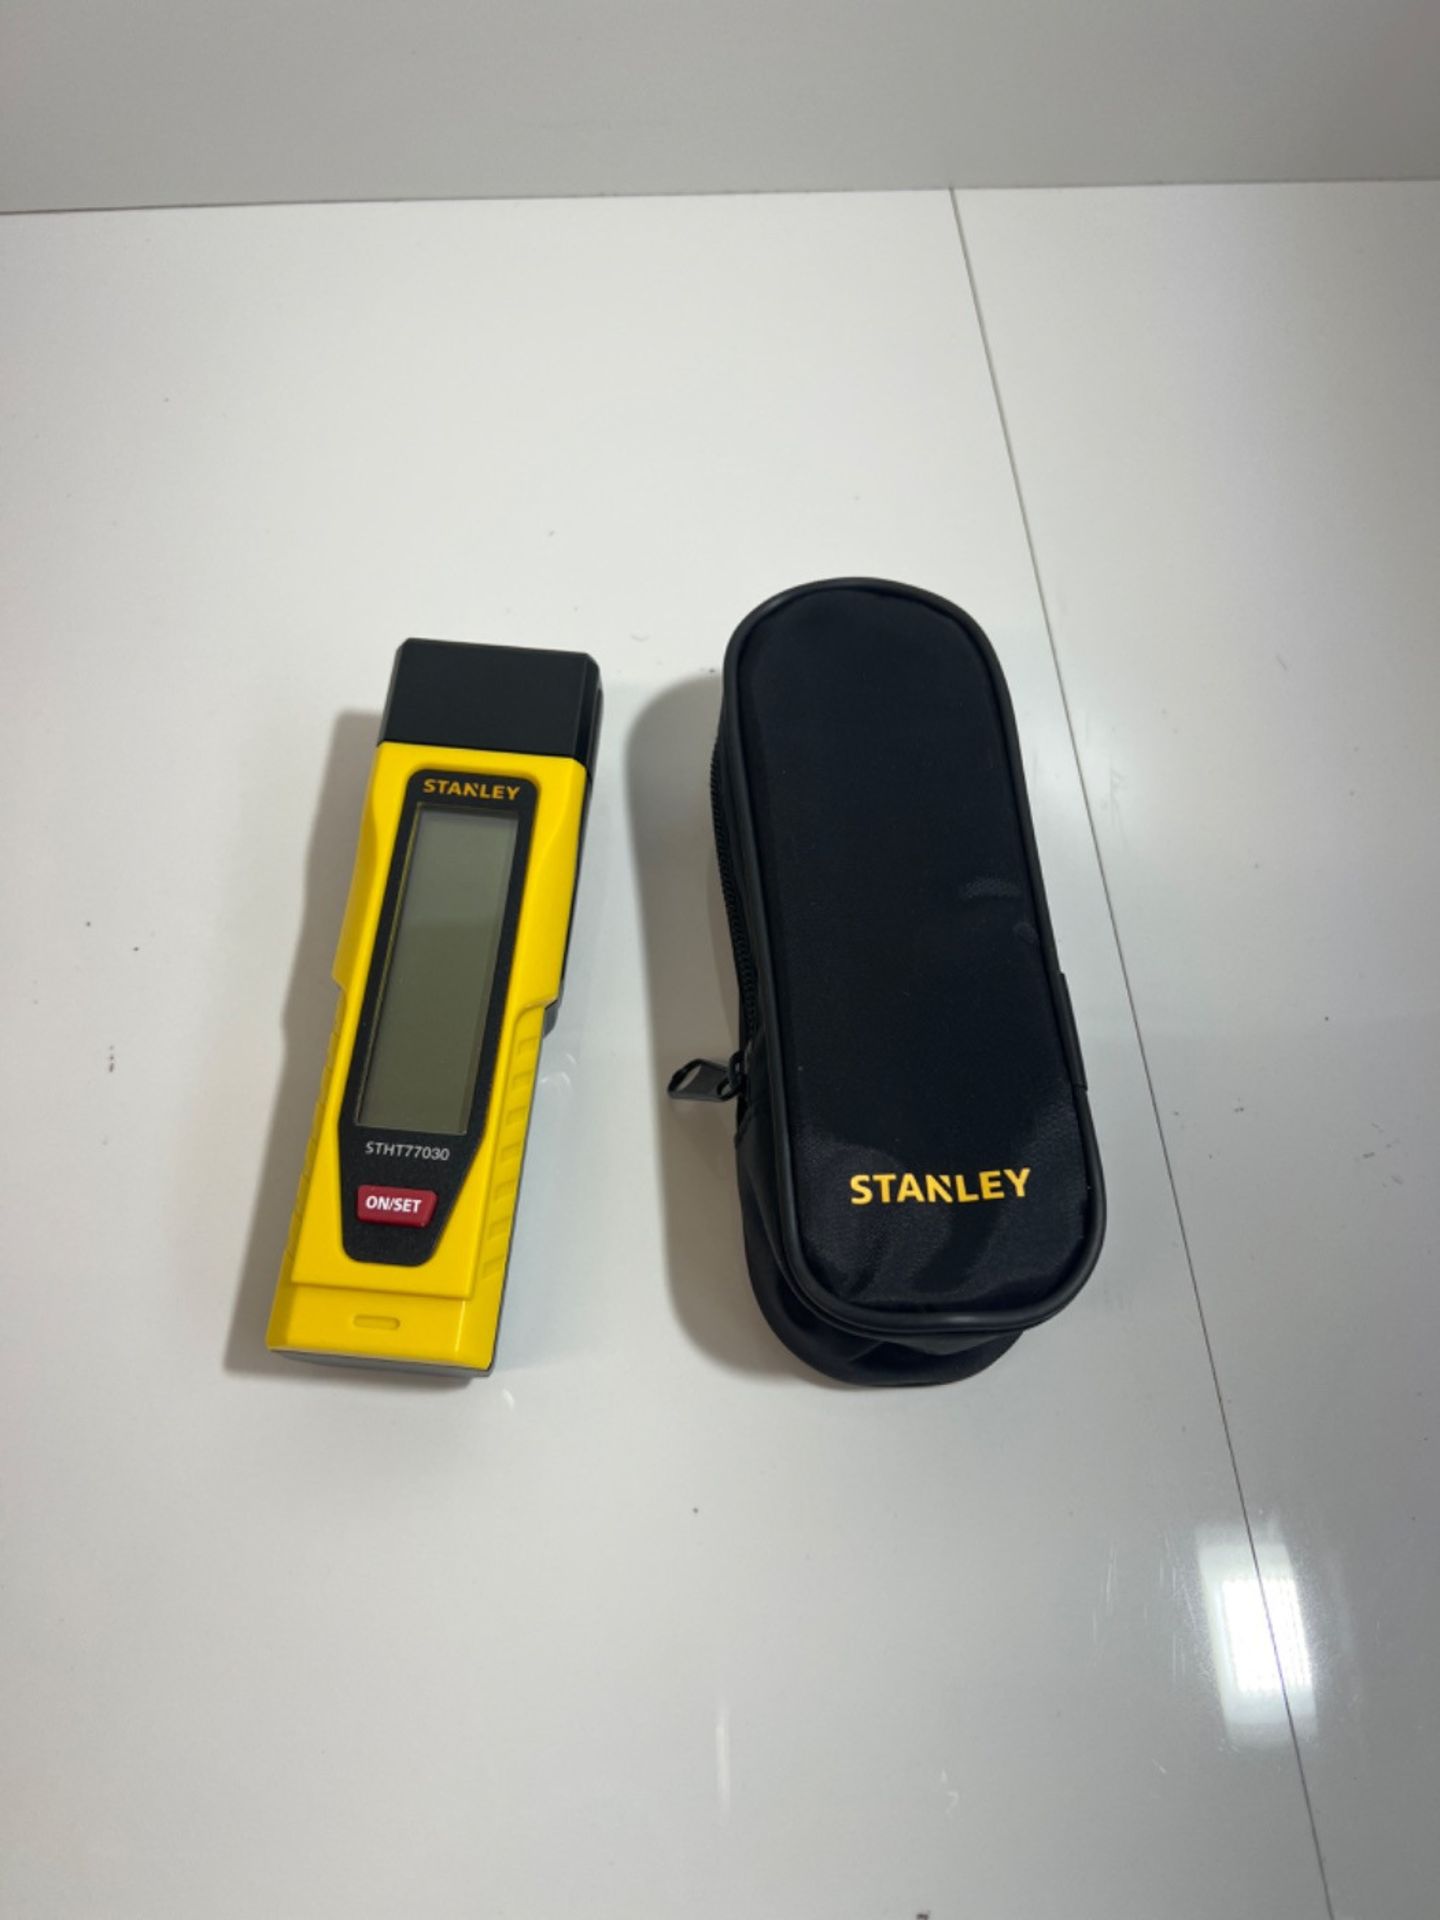 Stanley Moisture Meter With Two Detection Pins and LCD Screen Includes 4 X AAA Batteries 0-77-030 - Bild 2 aus 3